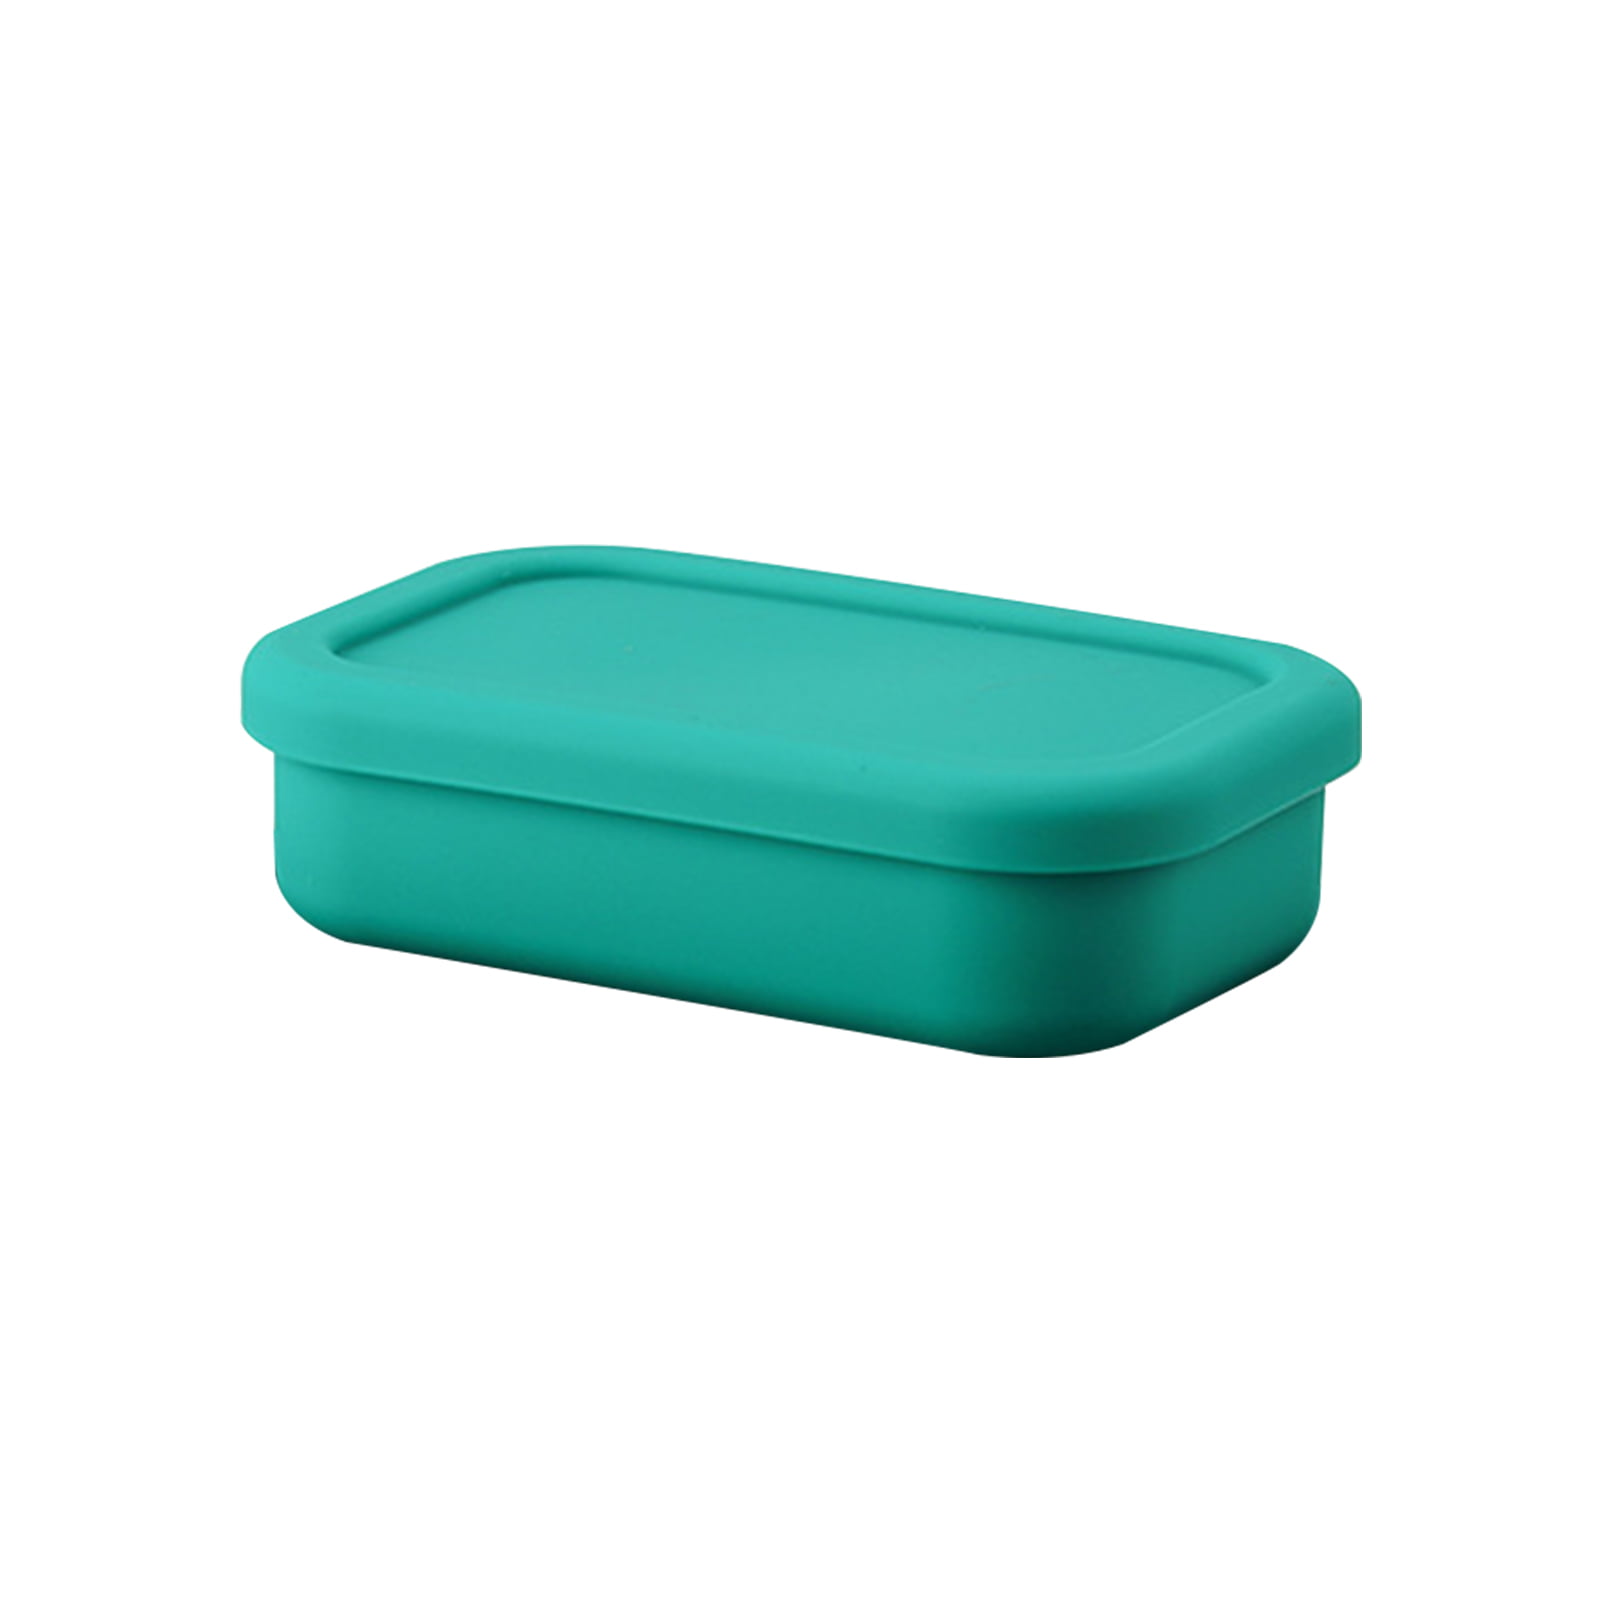 Large Capacity Food-Grade Silicone Bento Box with Leak-Proof Lid -  Microwave Safe, Temperature Resistant, and Portable for School and Work